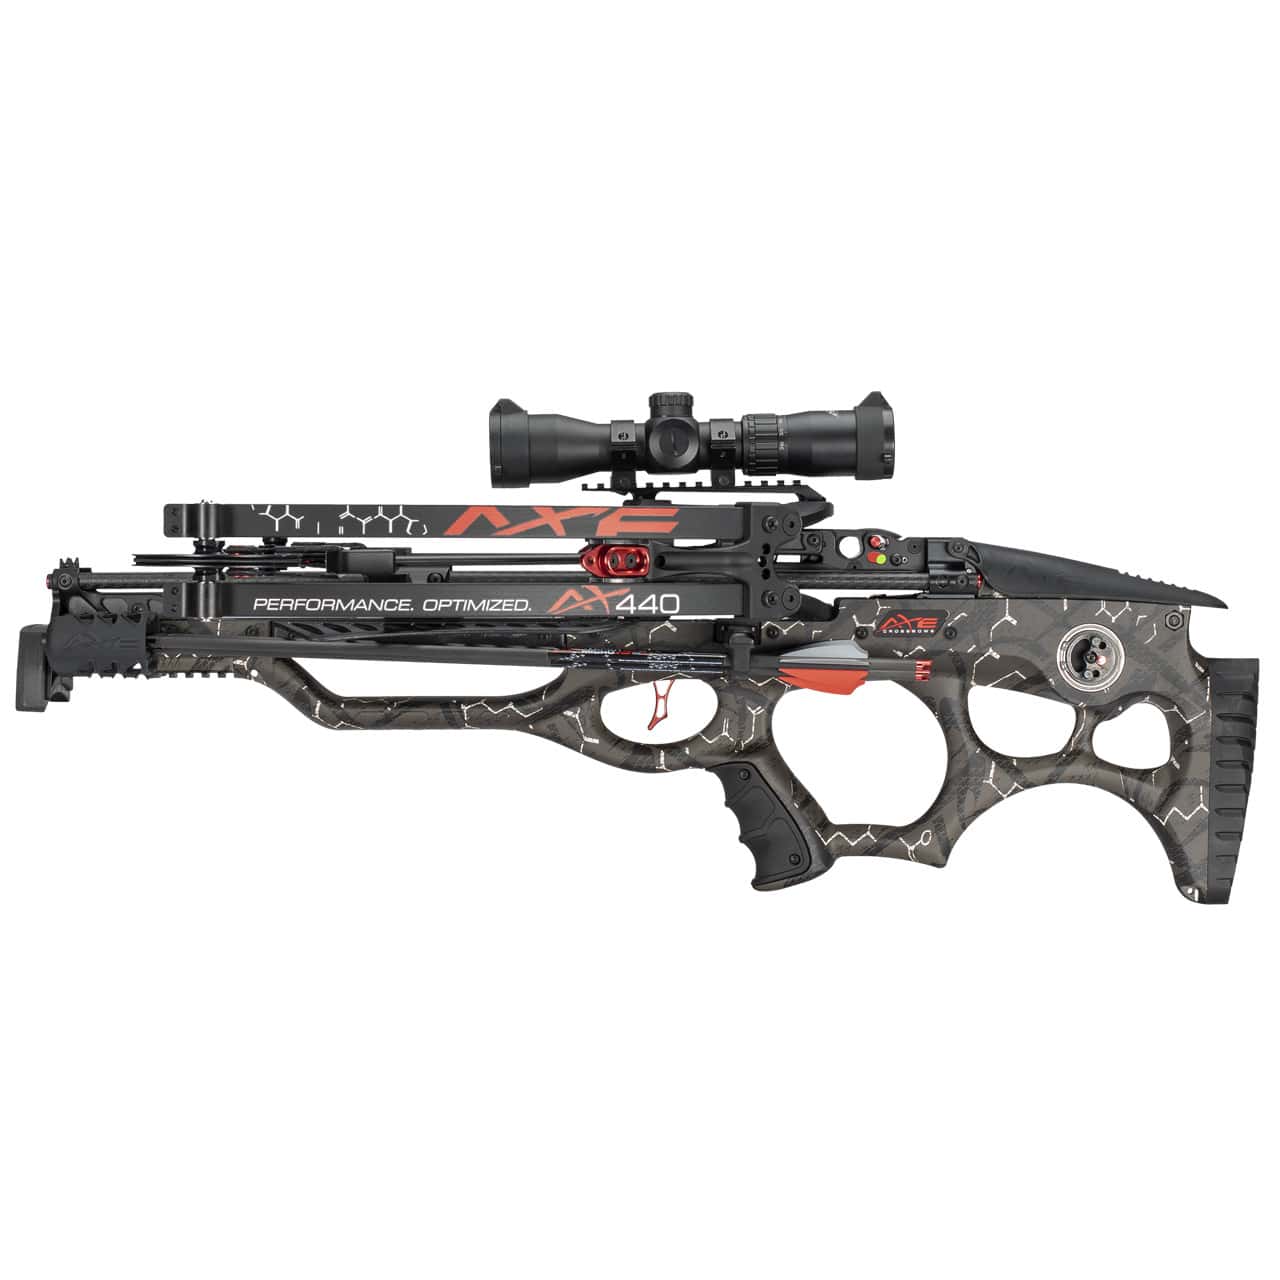 AX440 Crossbow Left Side